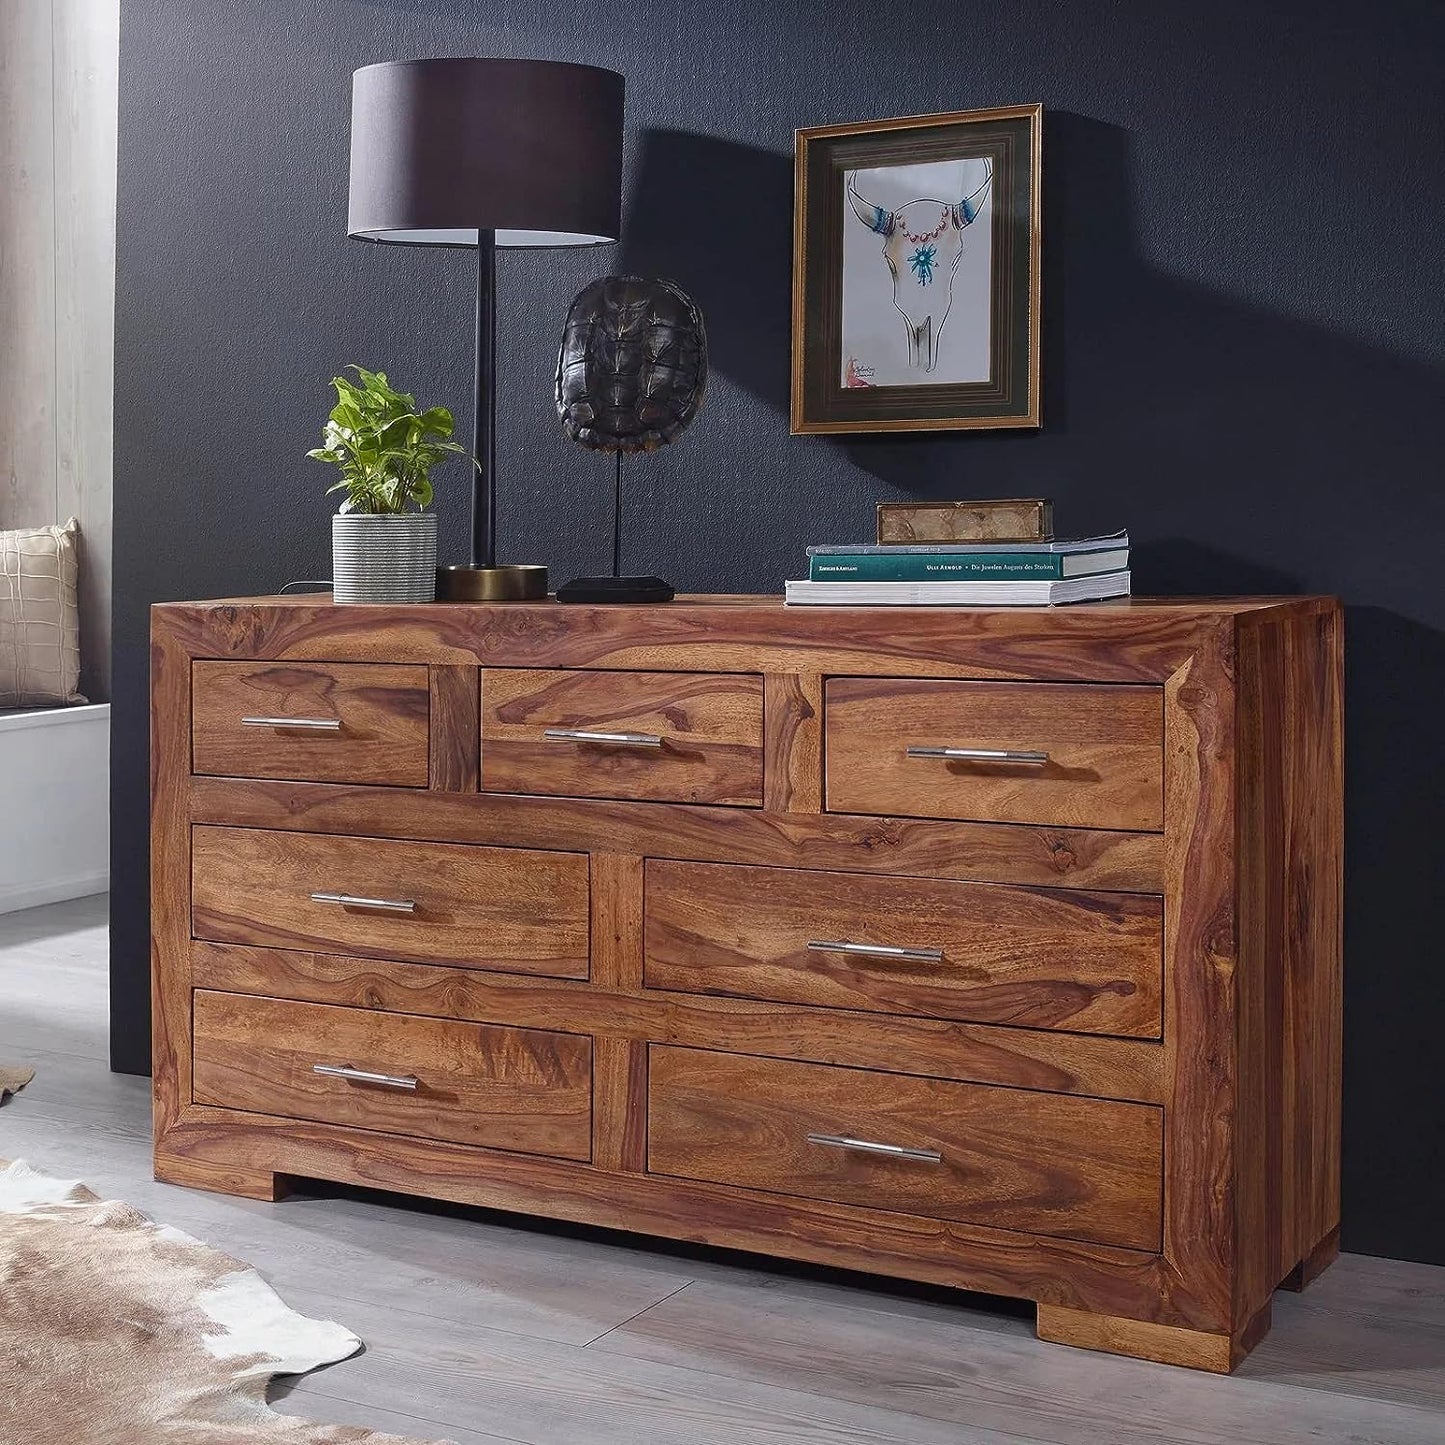 WoodMarwar Solid Sheesham Wood Chest of Drawer 7 Drawers Dresser for Home & Living Room